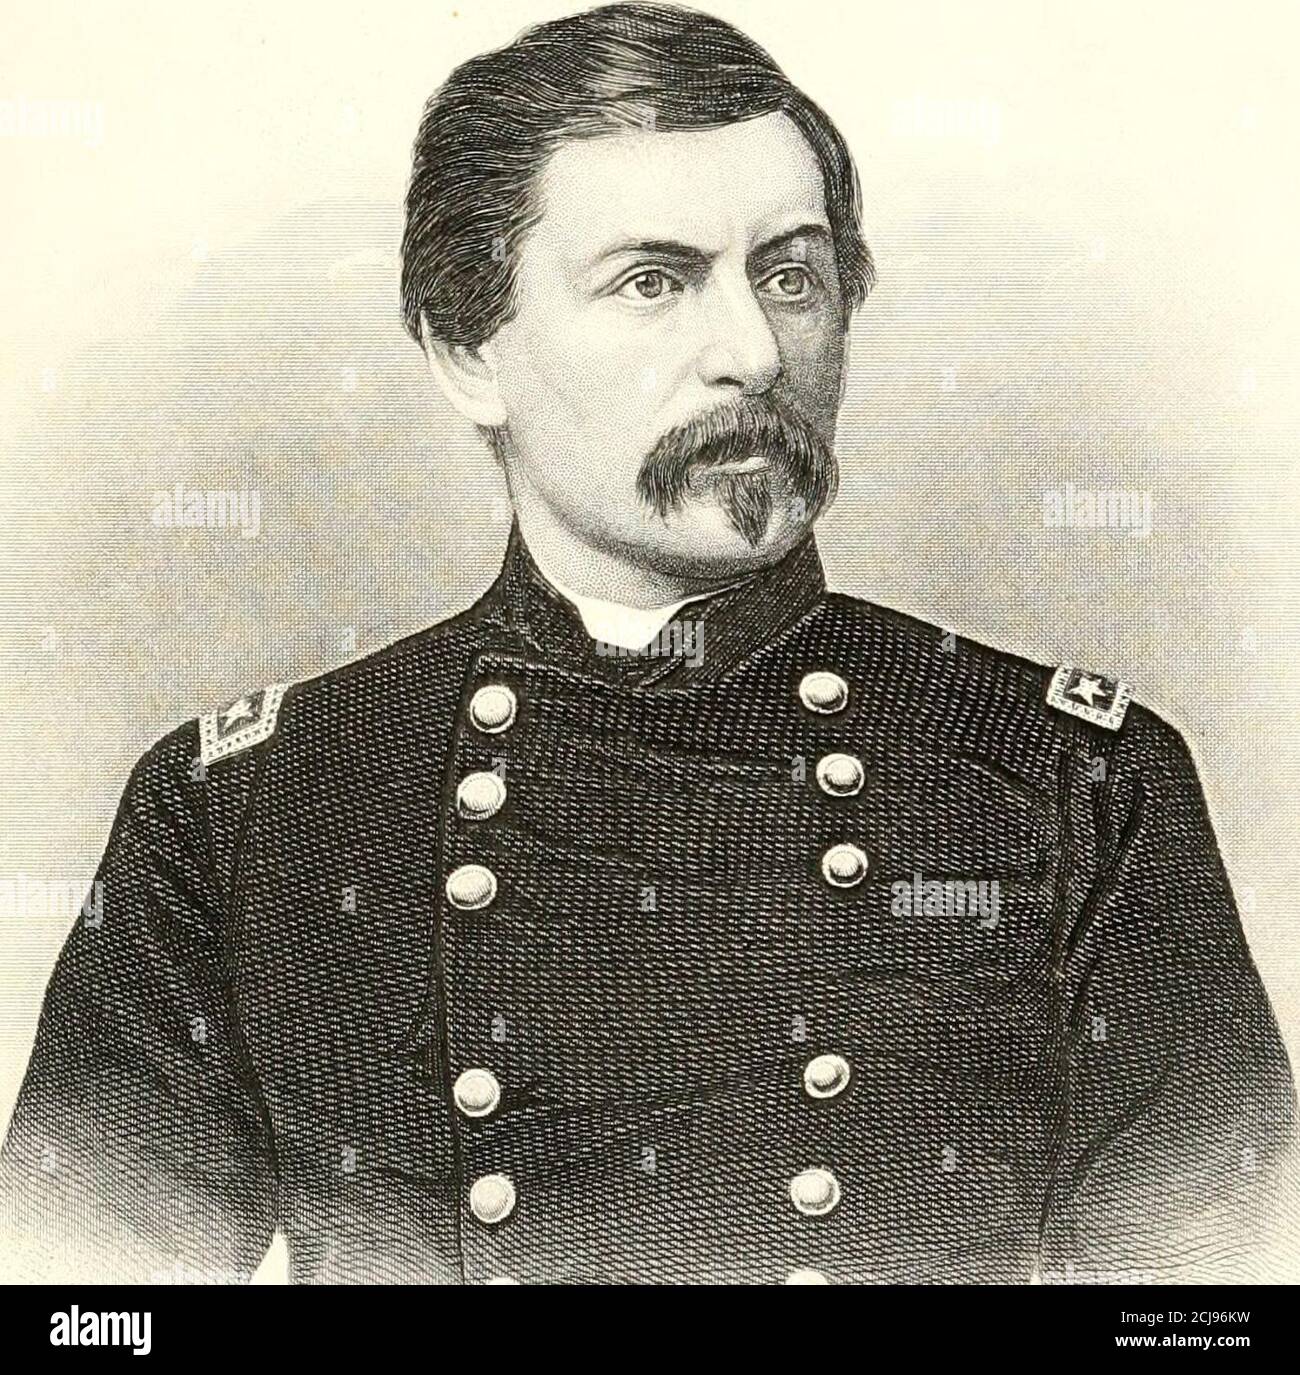 . The history of the Civil War in America; comprising a full and impartial account of the origin and progress of the rebellion, of the various naval and military engagements, of the heroic deeds performed by armies and individuals, and of touching scenes in the field, the camp, the hospital, and the cabin . so distinguished himself at thel^jttles of Contreras and Cherubusco, and at Chapultepec rose to the rank of captain. As militarygiigi.ncer he subsequently performed many valuable services, and was sent by the government oftiie tFnited States to the Crimea, as one of the commission of three Stock Photo